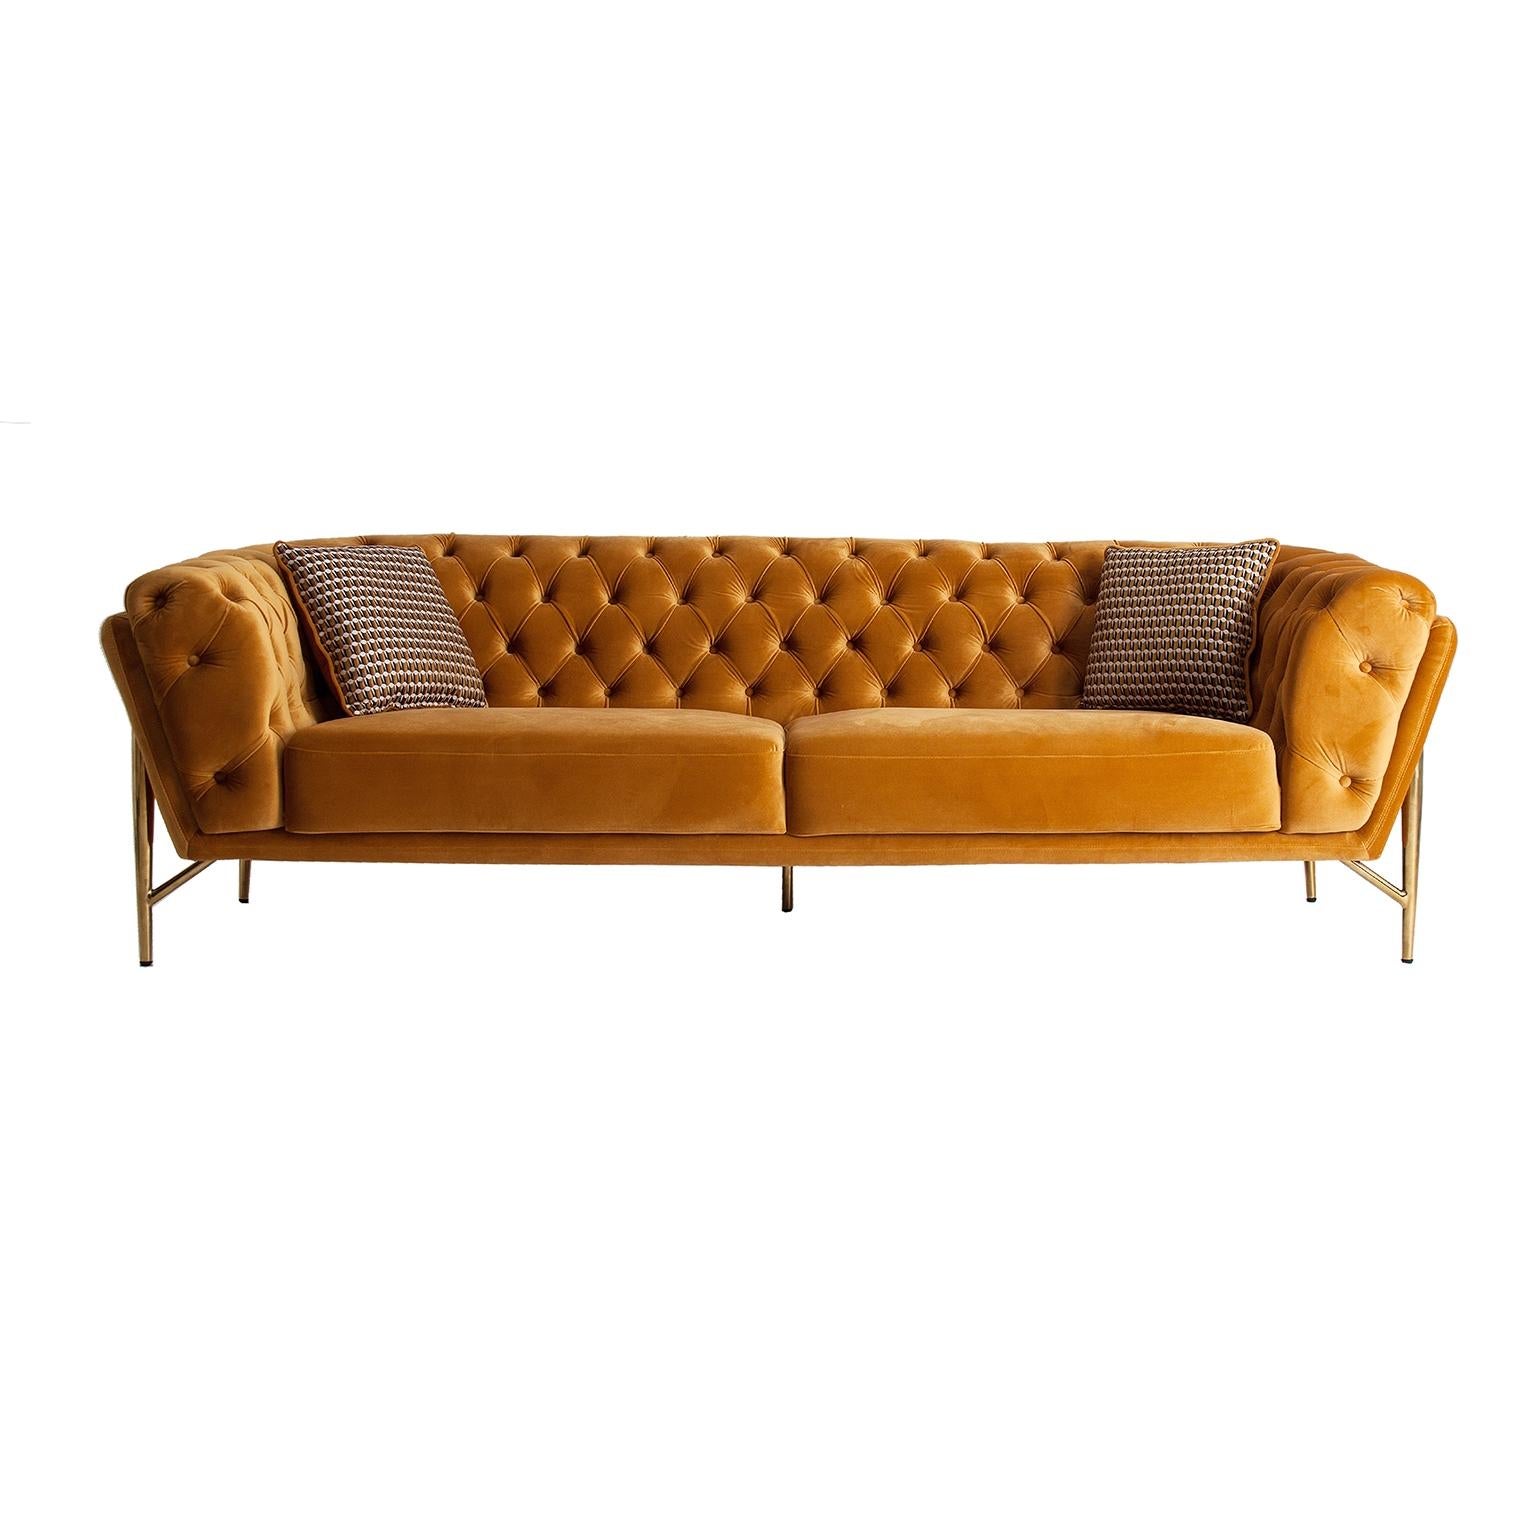 Brass metal design feet and padded velvet soft and comfy sofa.